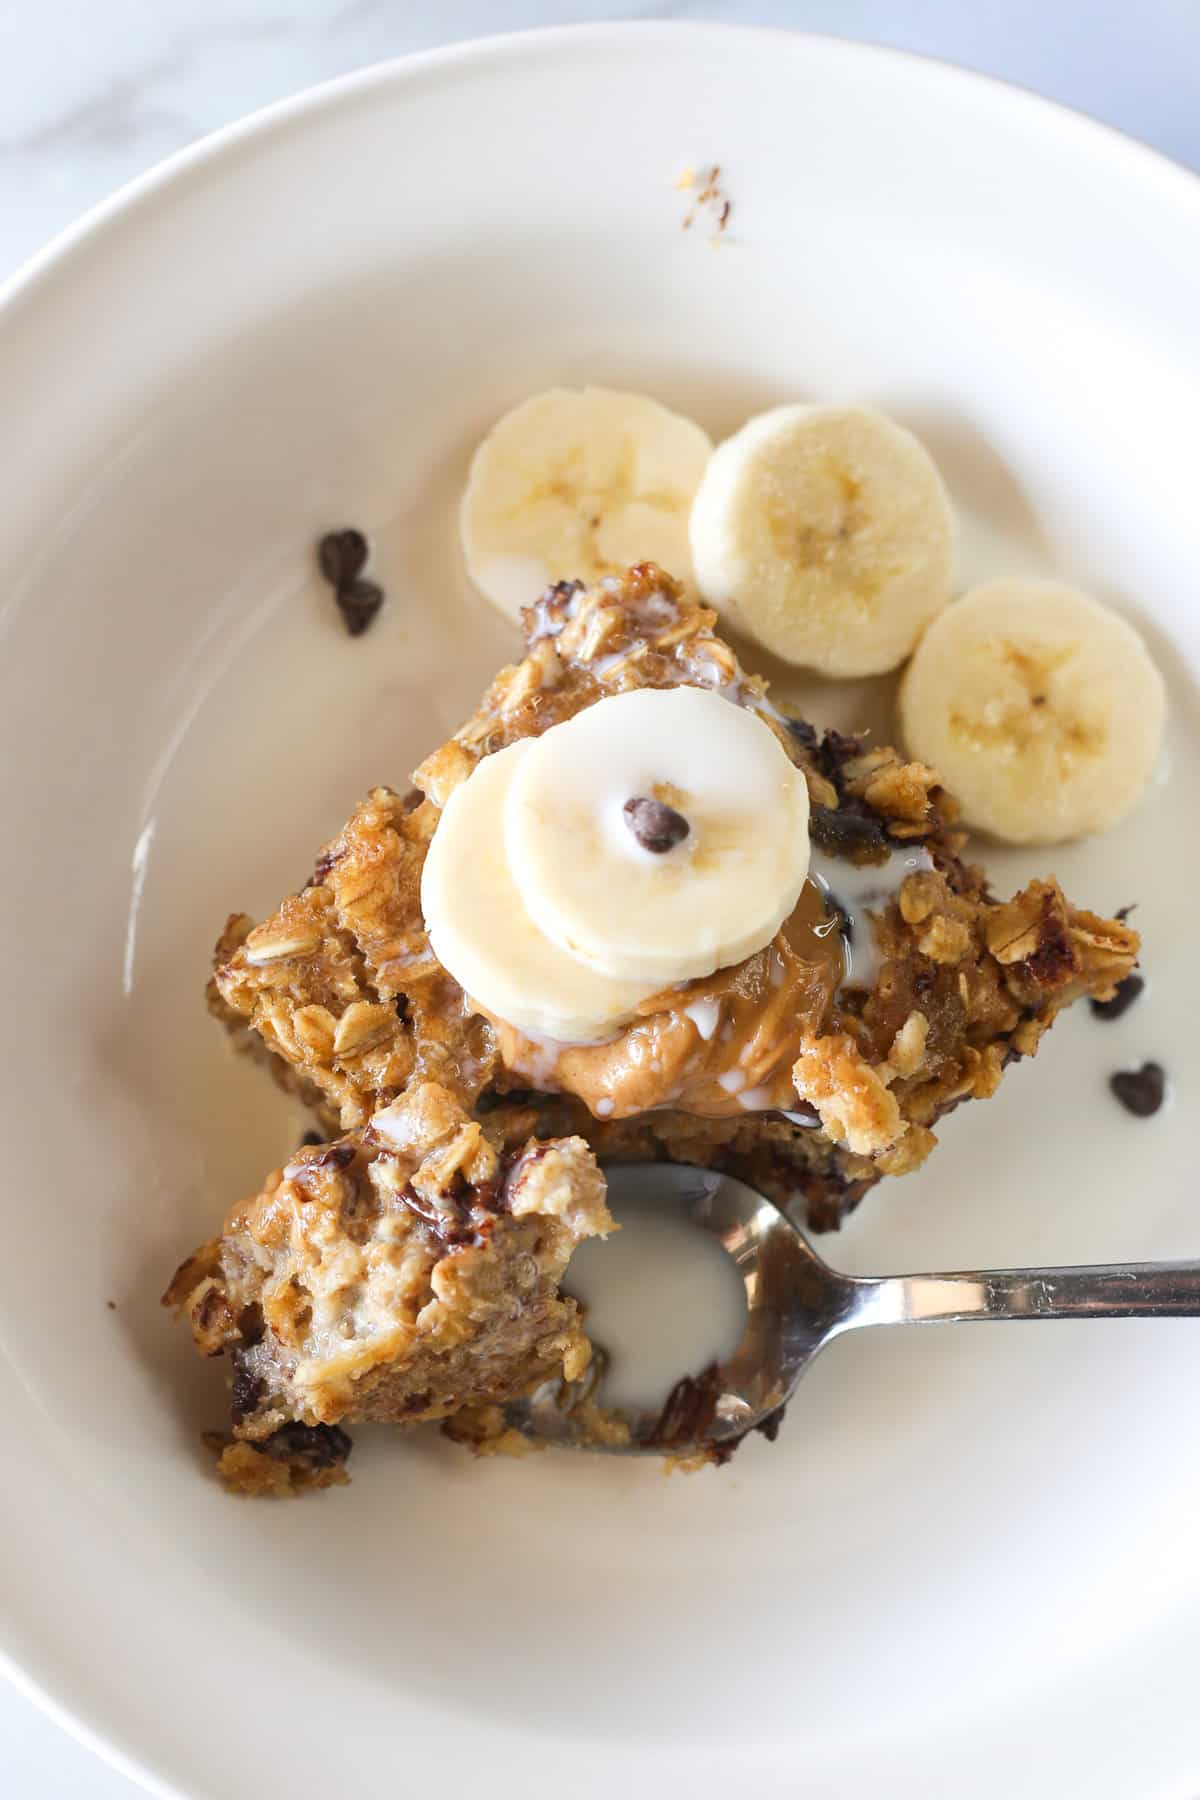 A slice of baked oatmeal in a bowl topped with milk, peanut butter, banana slices, and mini chocolate chips.